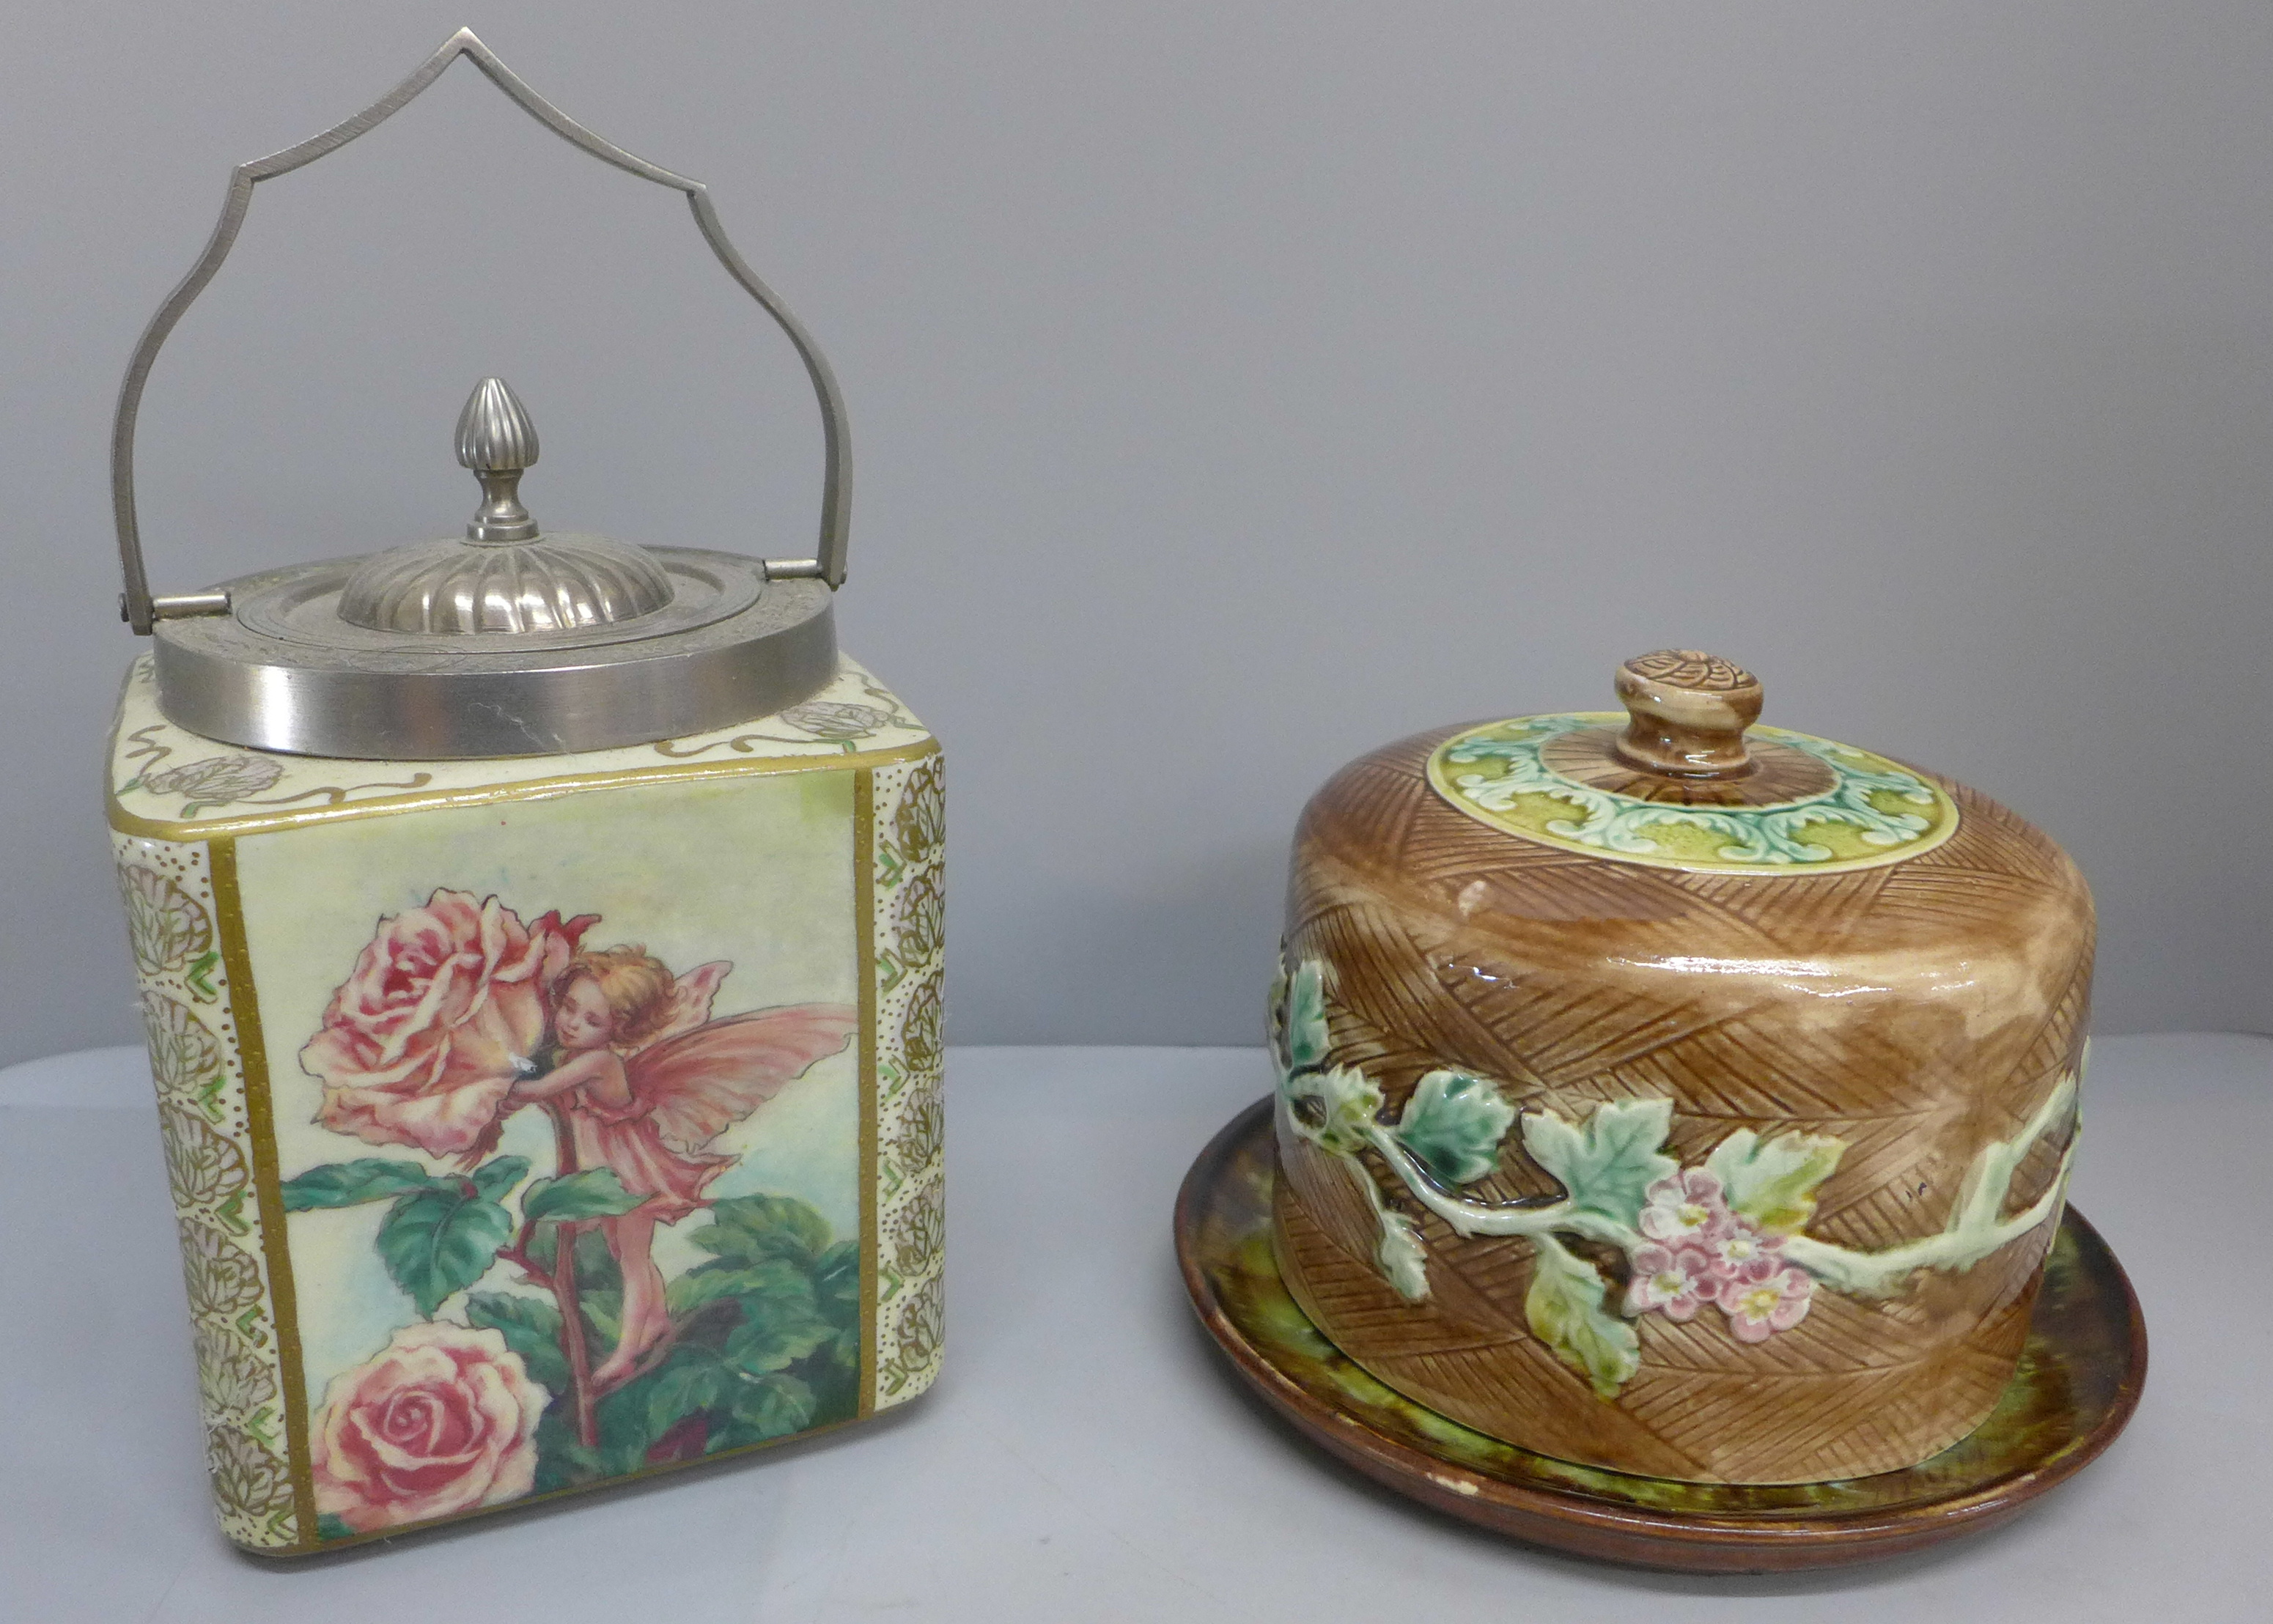 A Majolica cheese dome and a Carlton Fantasia ware biscuit barrel